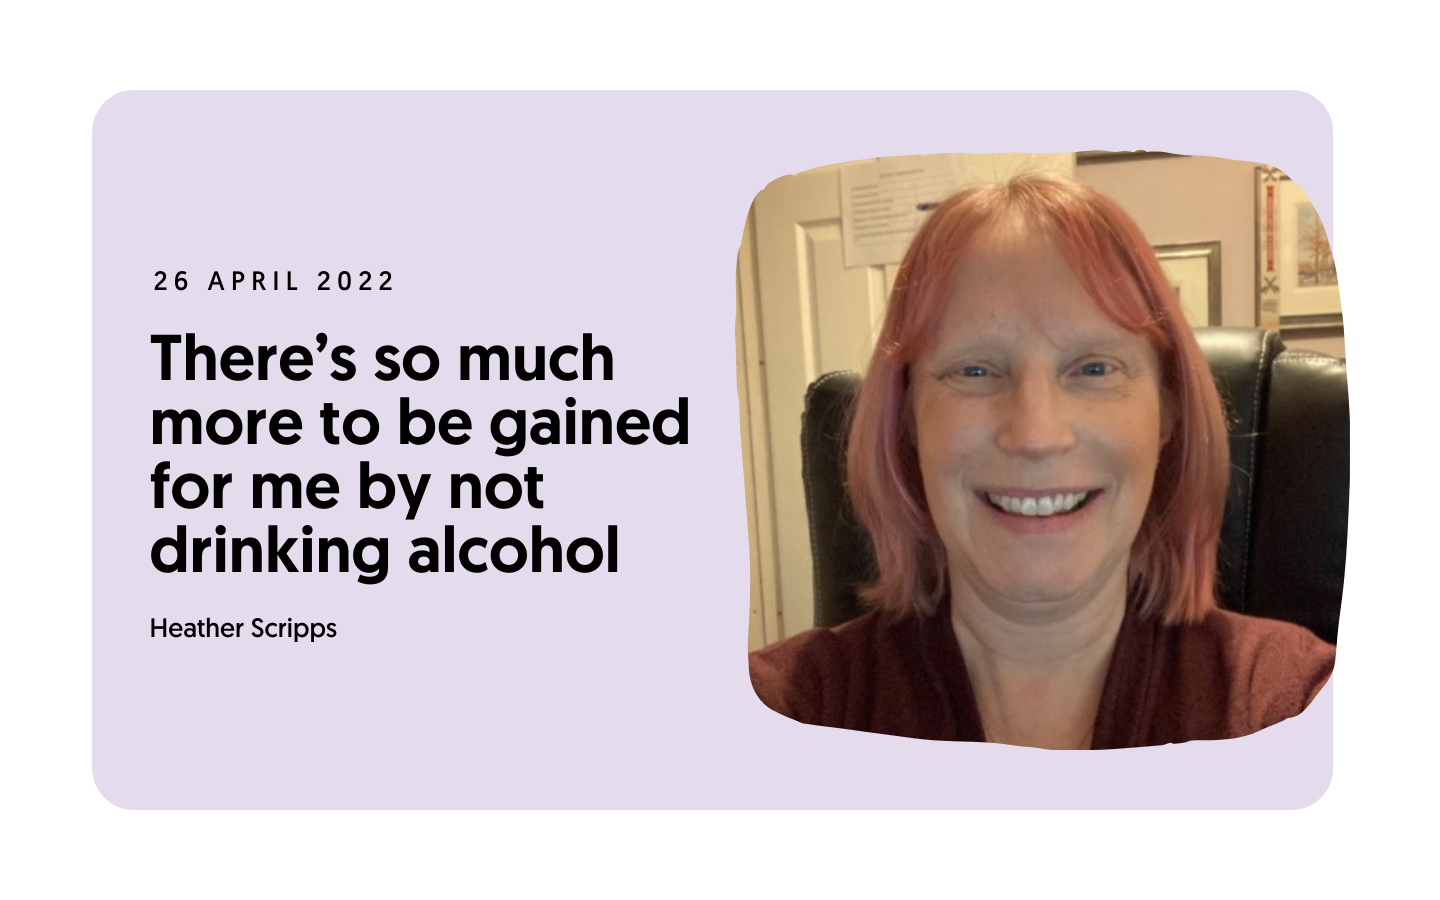 There’s so much more to be gained for me by not drinking alcohol—Heather Scripps